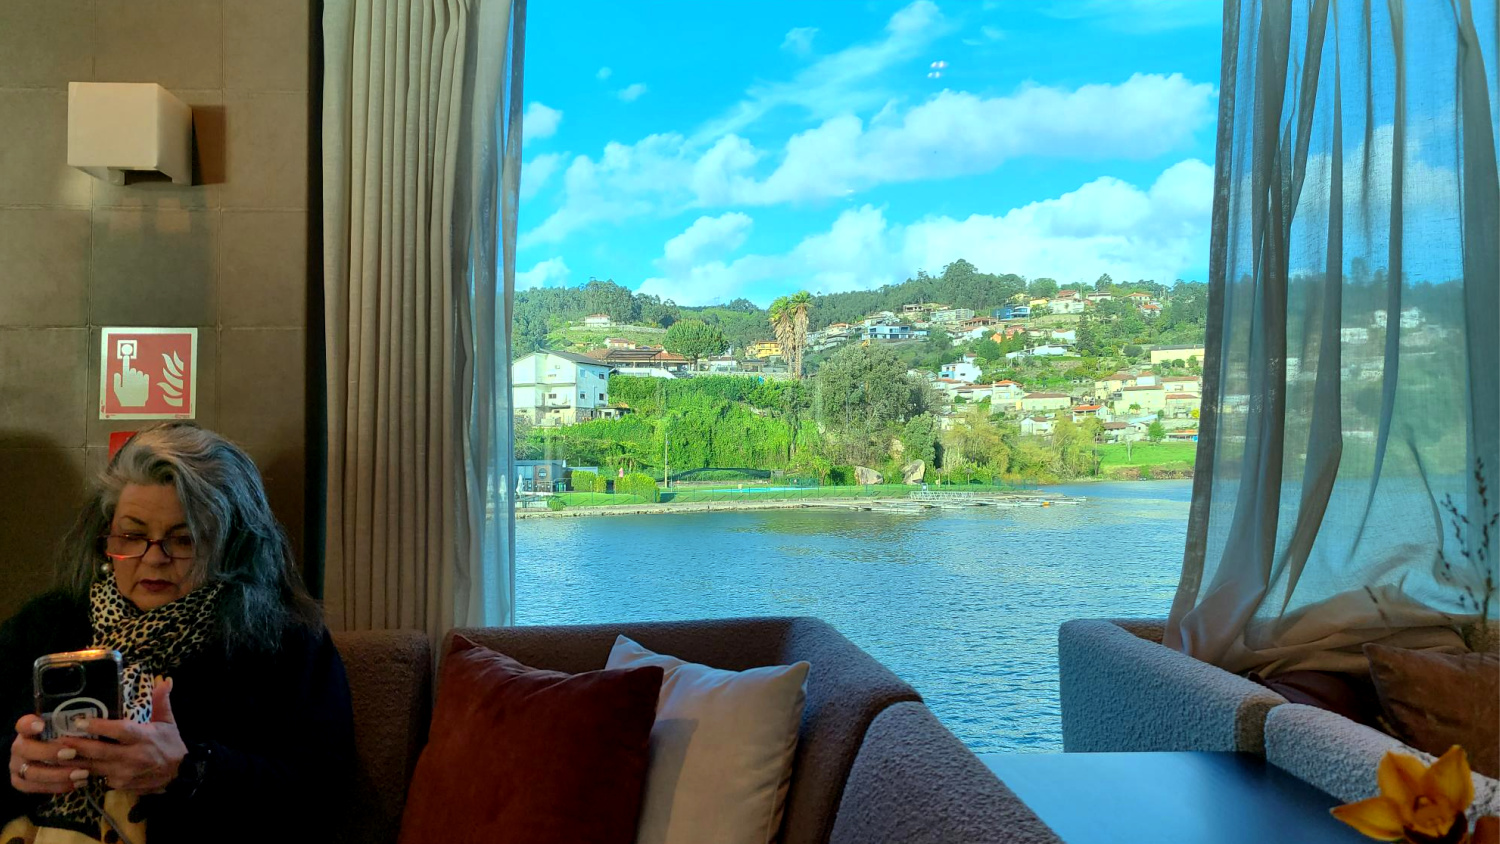 A solo traveler enjoys this river cruise in the panorama lounge.